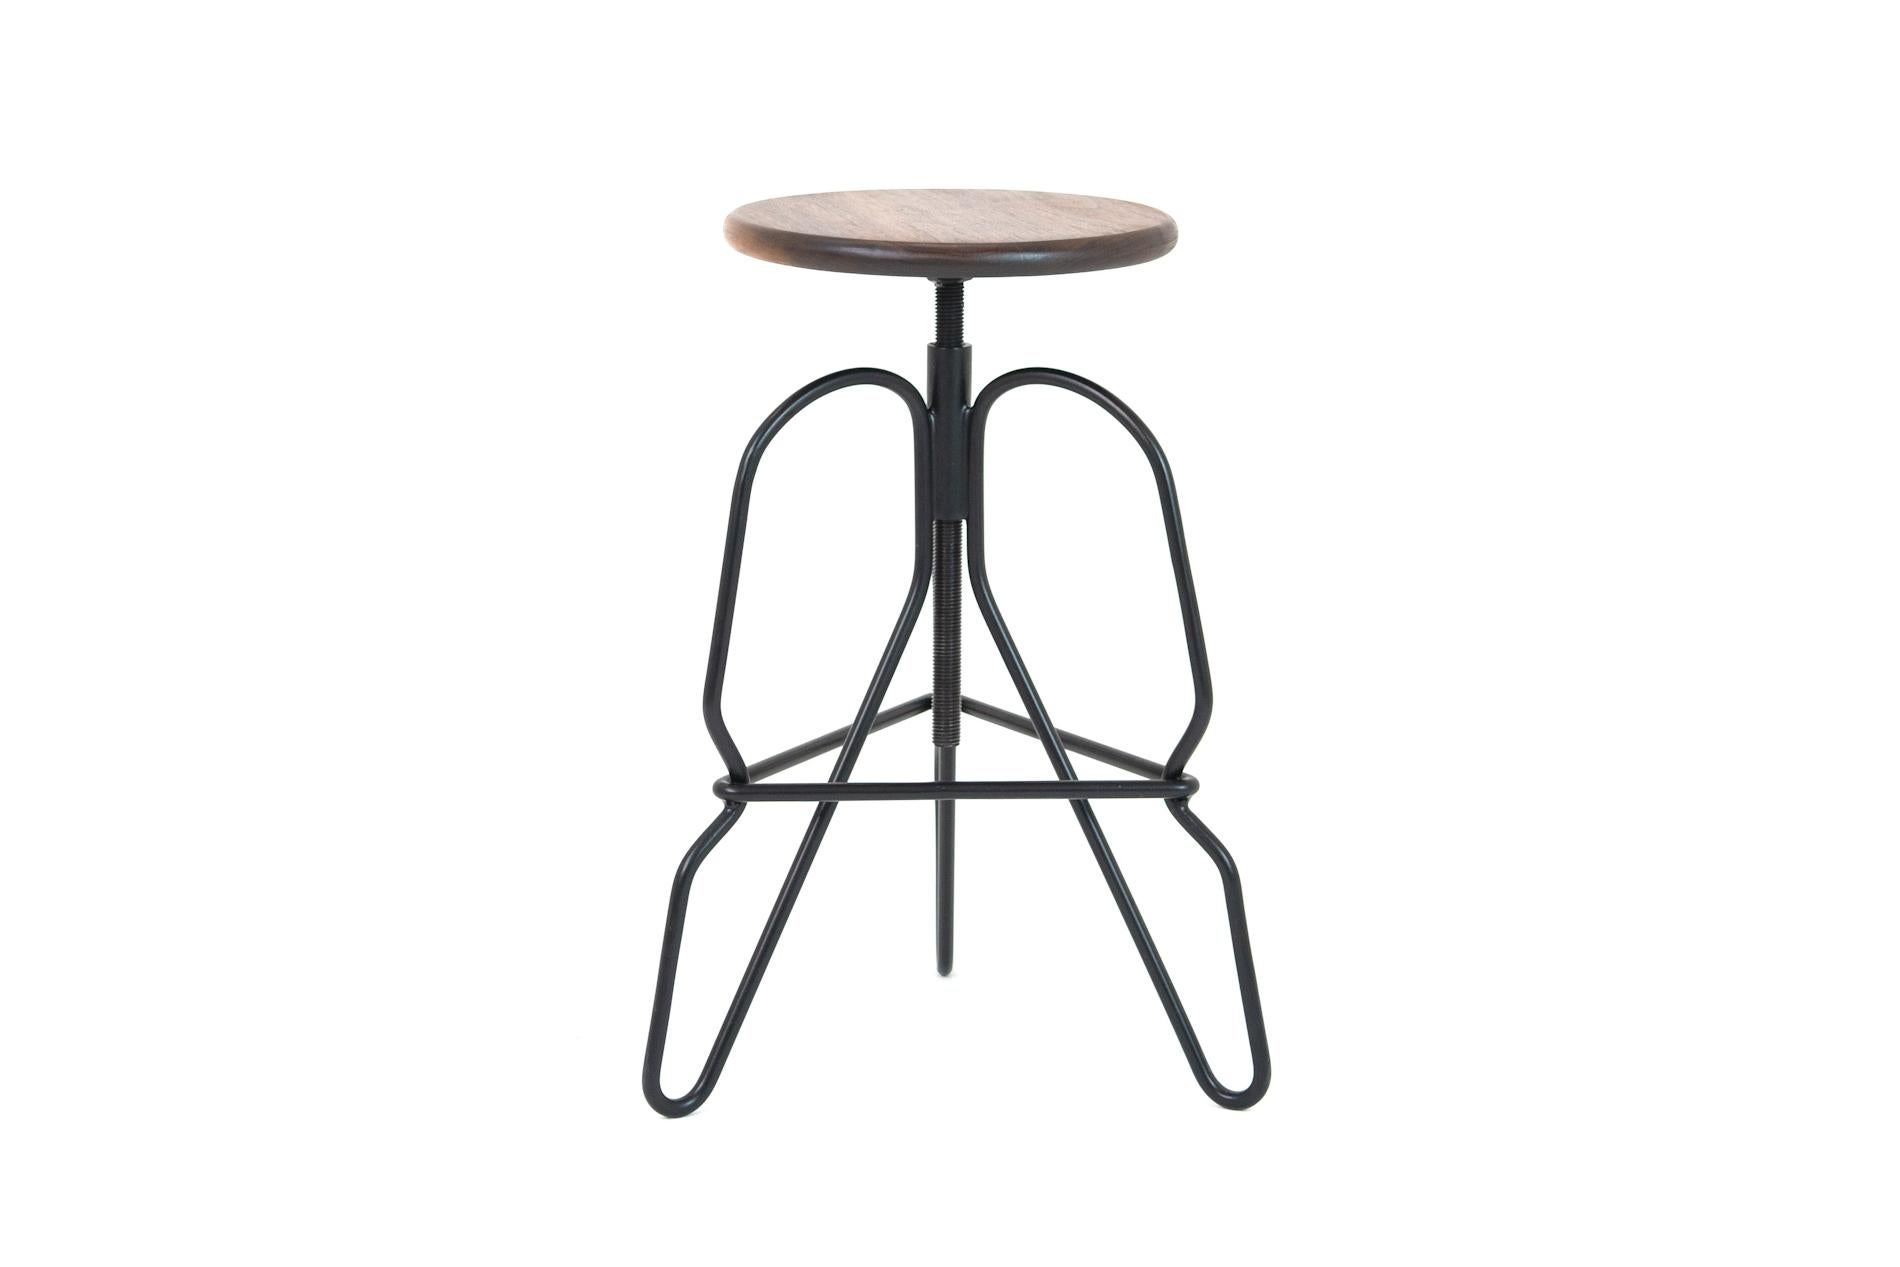 The rig stool is a minimal solid steel stool featuring an adjustable solid wood seat on a threaded rod. The legs are tied together with a triangular brace that serves as a footrest. 

This handcrafted piece is hand-oiled using our in-house oils and